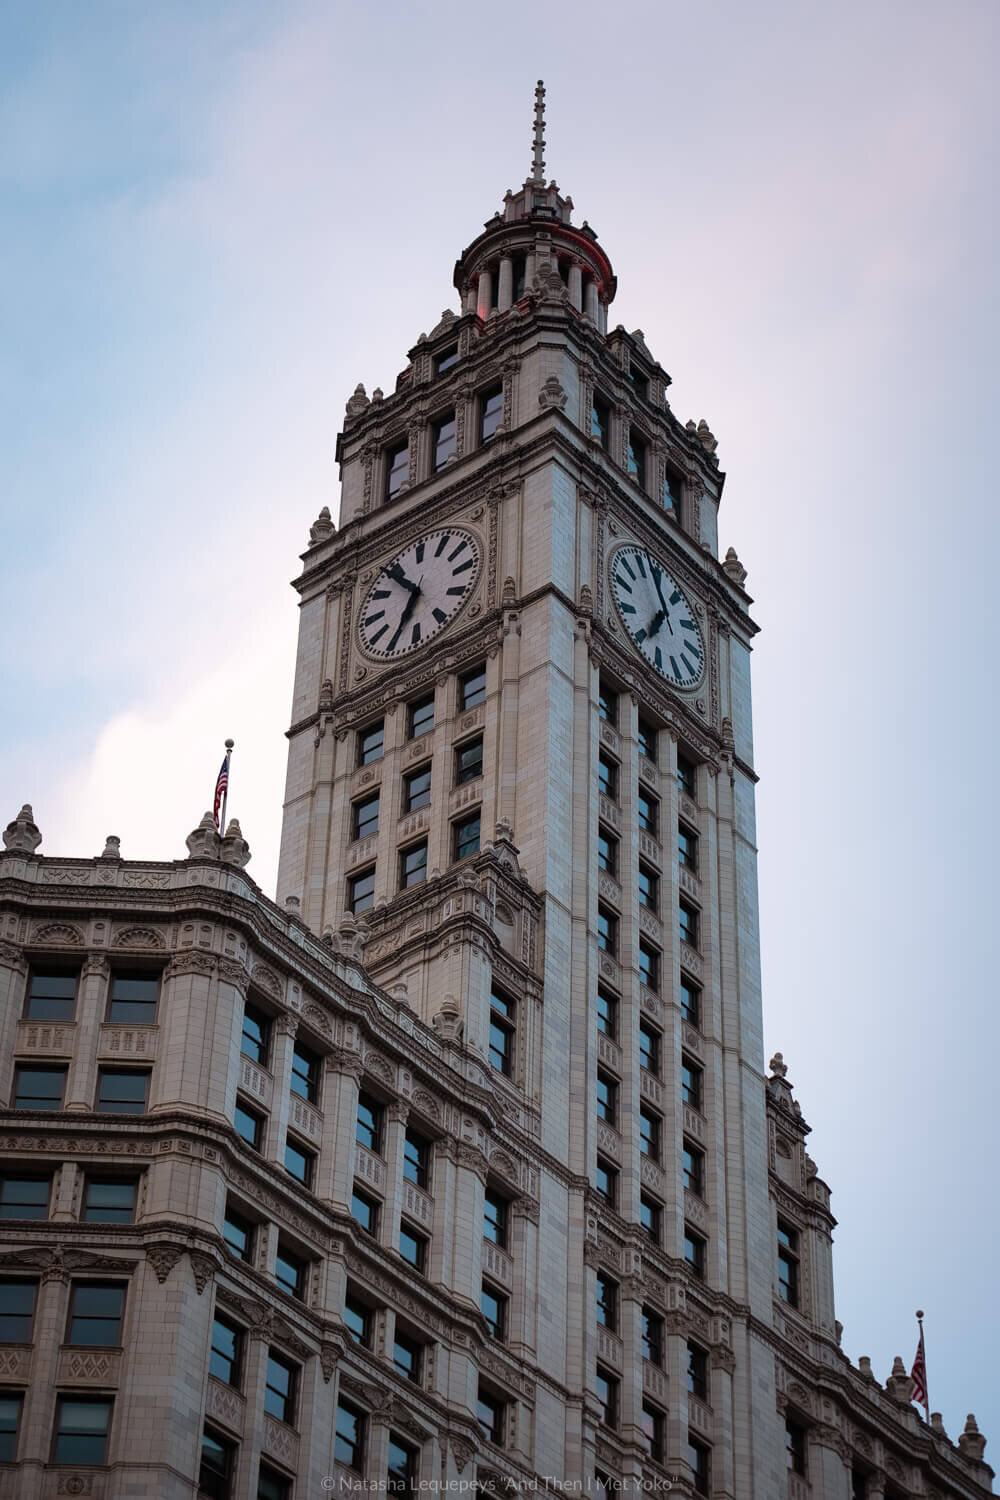 The Wrigley Building in Chicago, USA. Travel photography and guide by © Natasha Lequepeys for "And Then I Met Yoko". #chicago #usa #travelblog #travelphotography